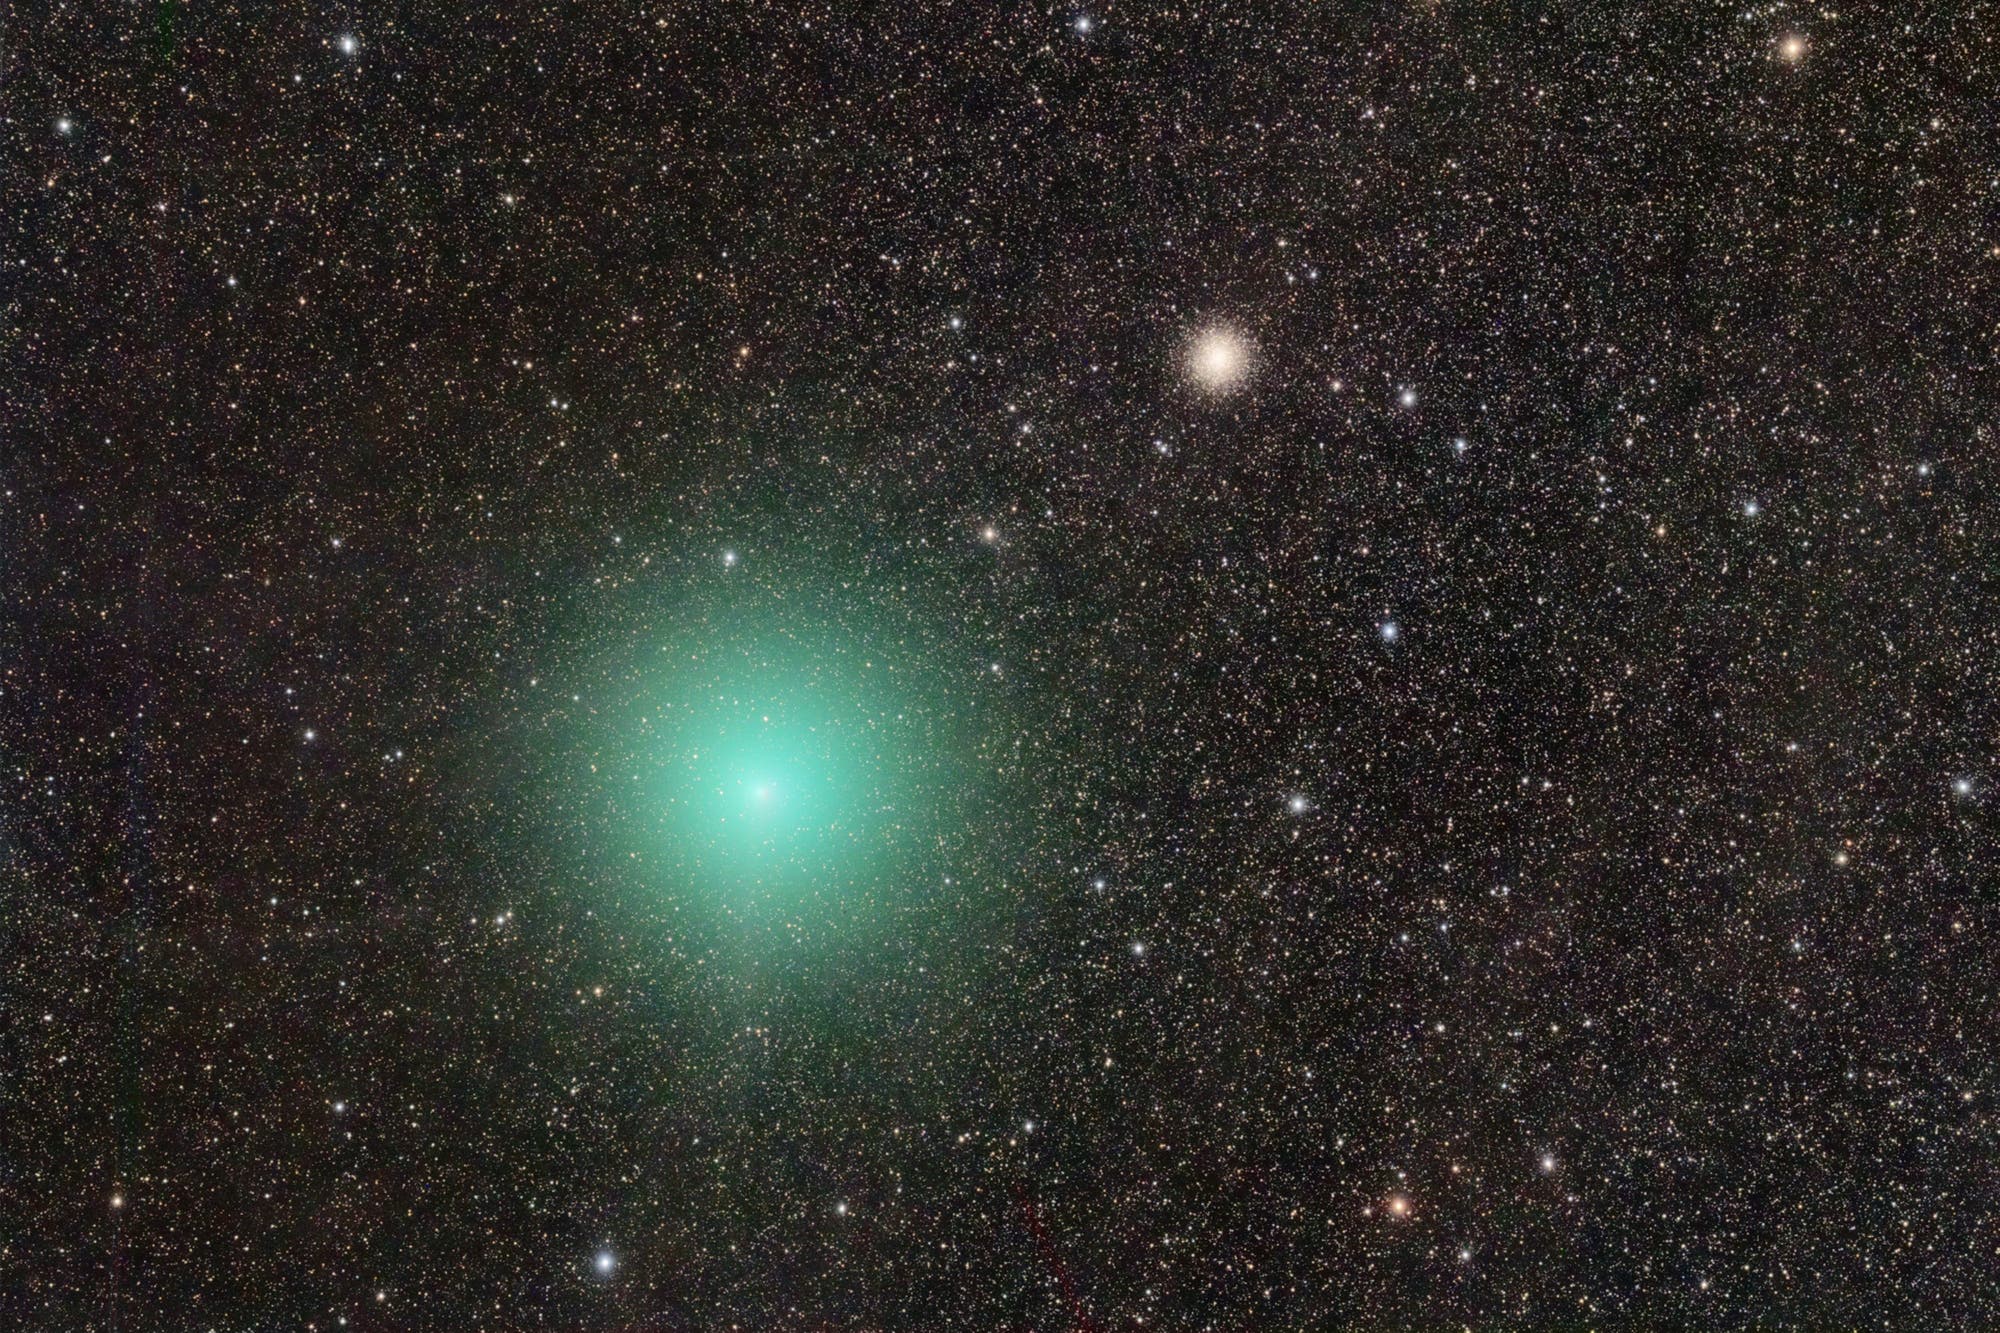 Comet 252P and M14 on the Milky Way